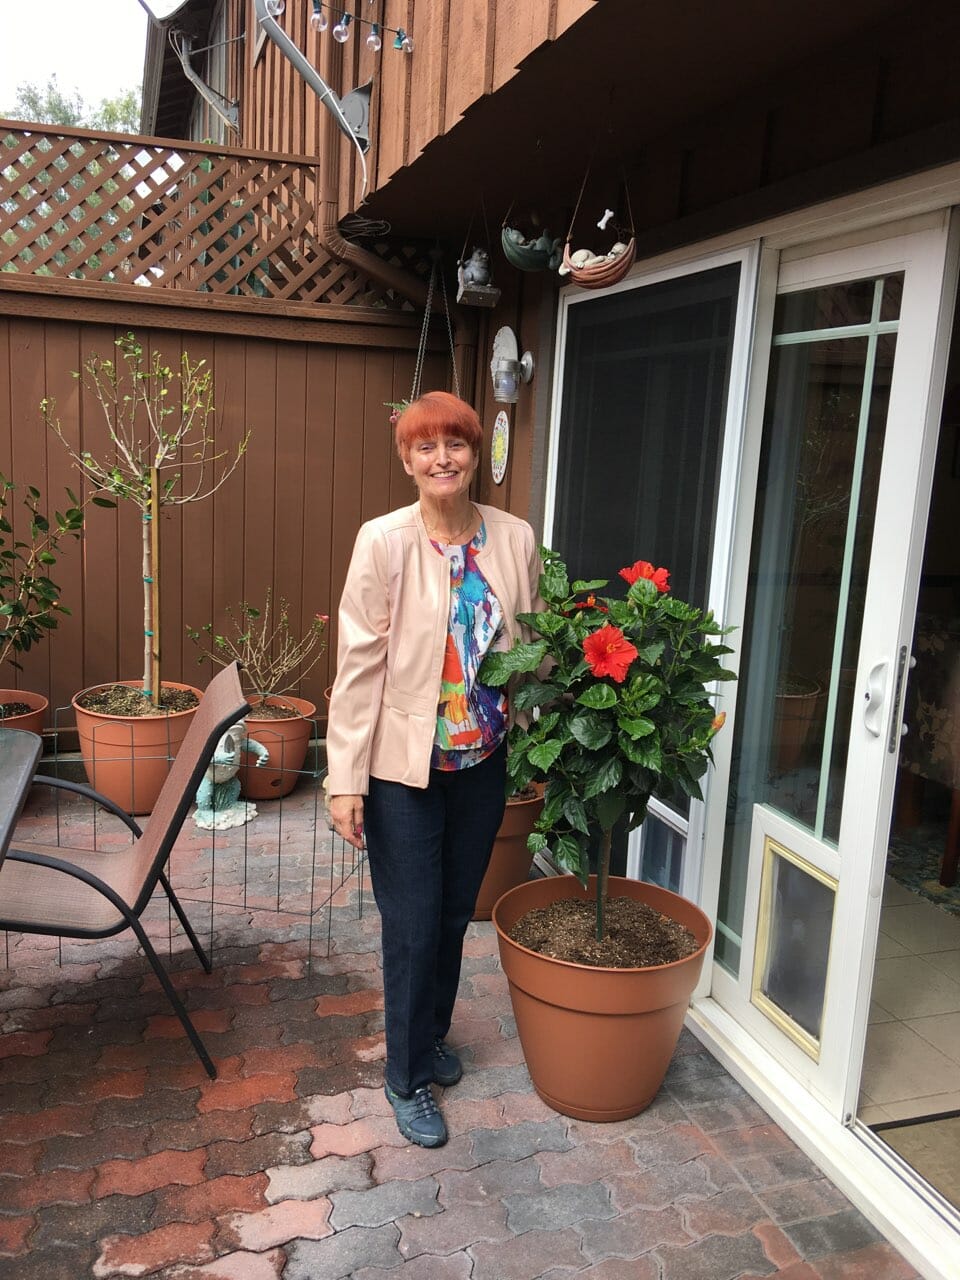 A smiling Midnight Velvet customer by a patio garden, wearing a blush peplum jacket ,colorful splash top, and denim jeans.